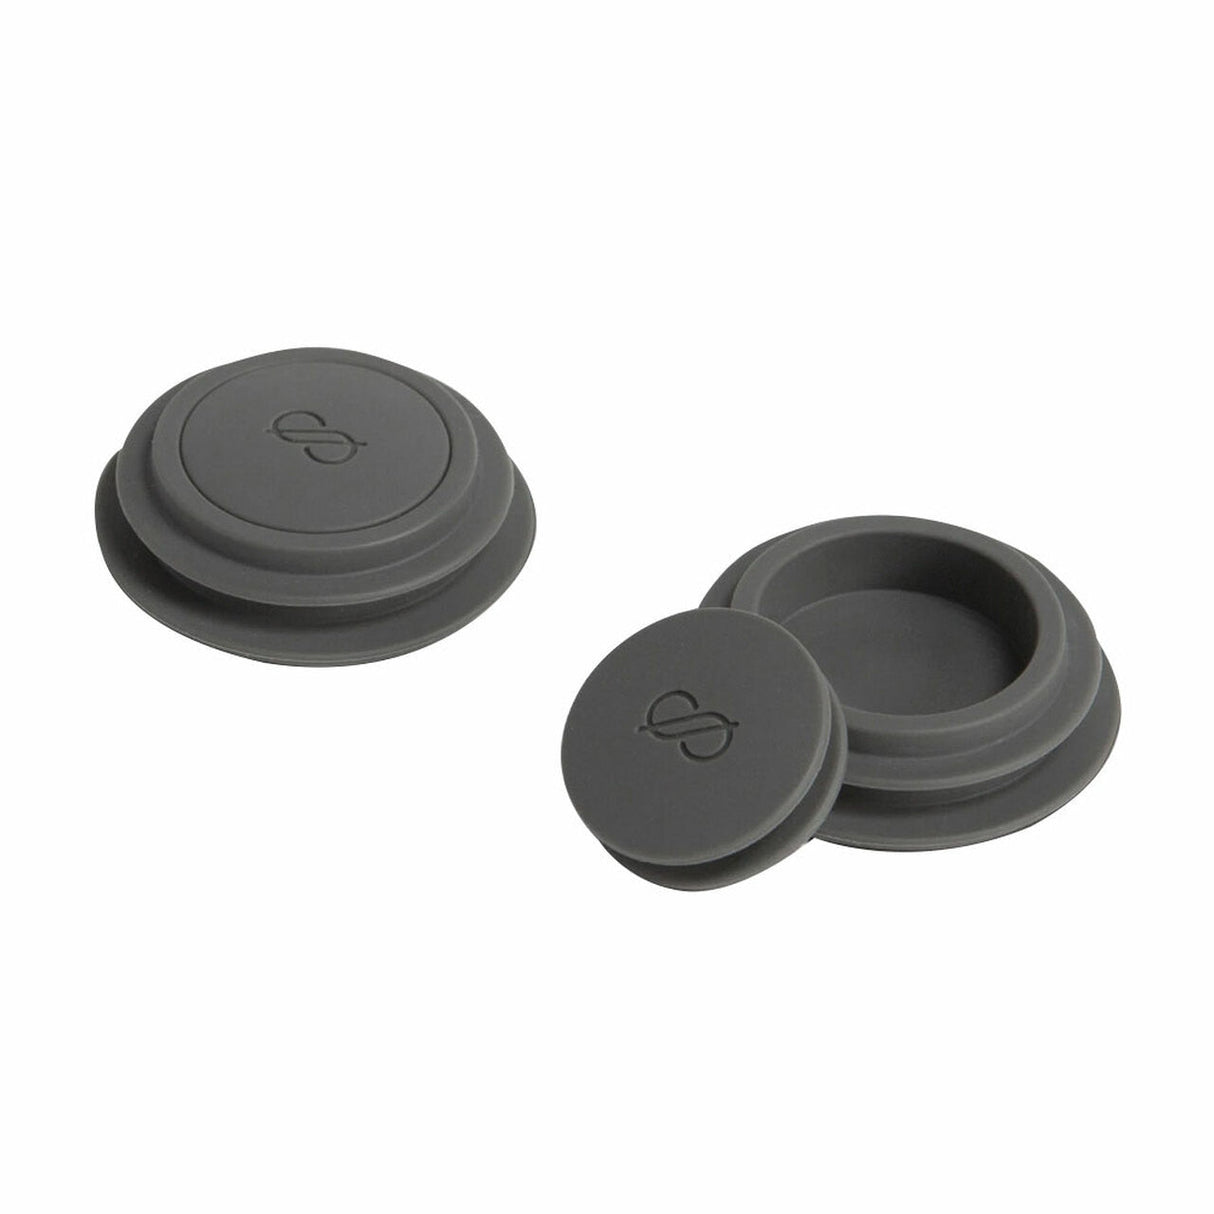 Session Goods Silicone Cleaning Caps in Gray for Bongs, Compact Design, Top View